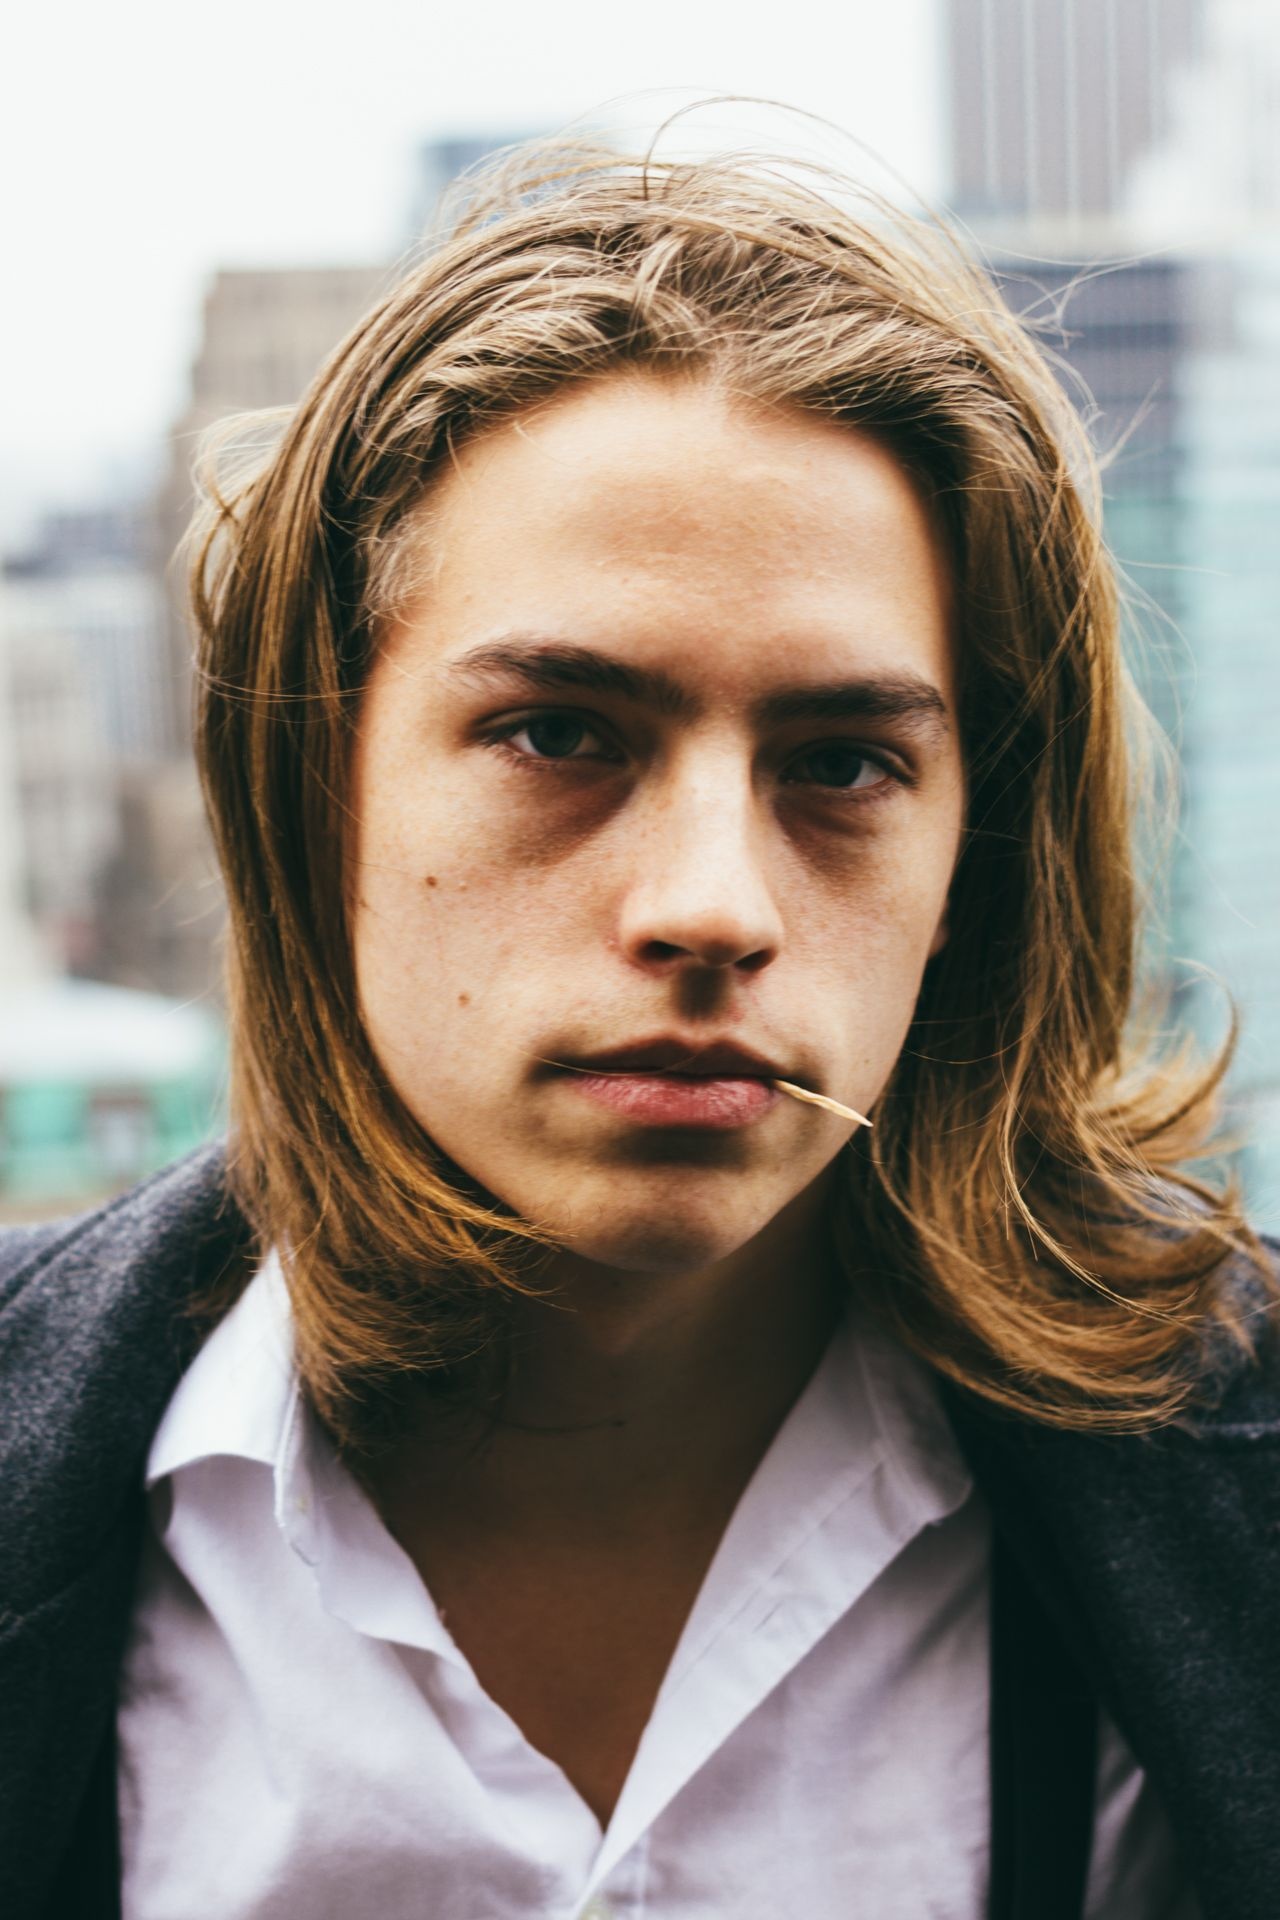 Cole Sprouse TV Shows, Dylan Sprouse wallpapers, The Sprouse brothers, 1280x1920 HD Handy